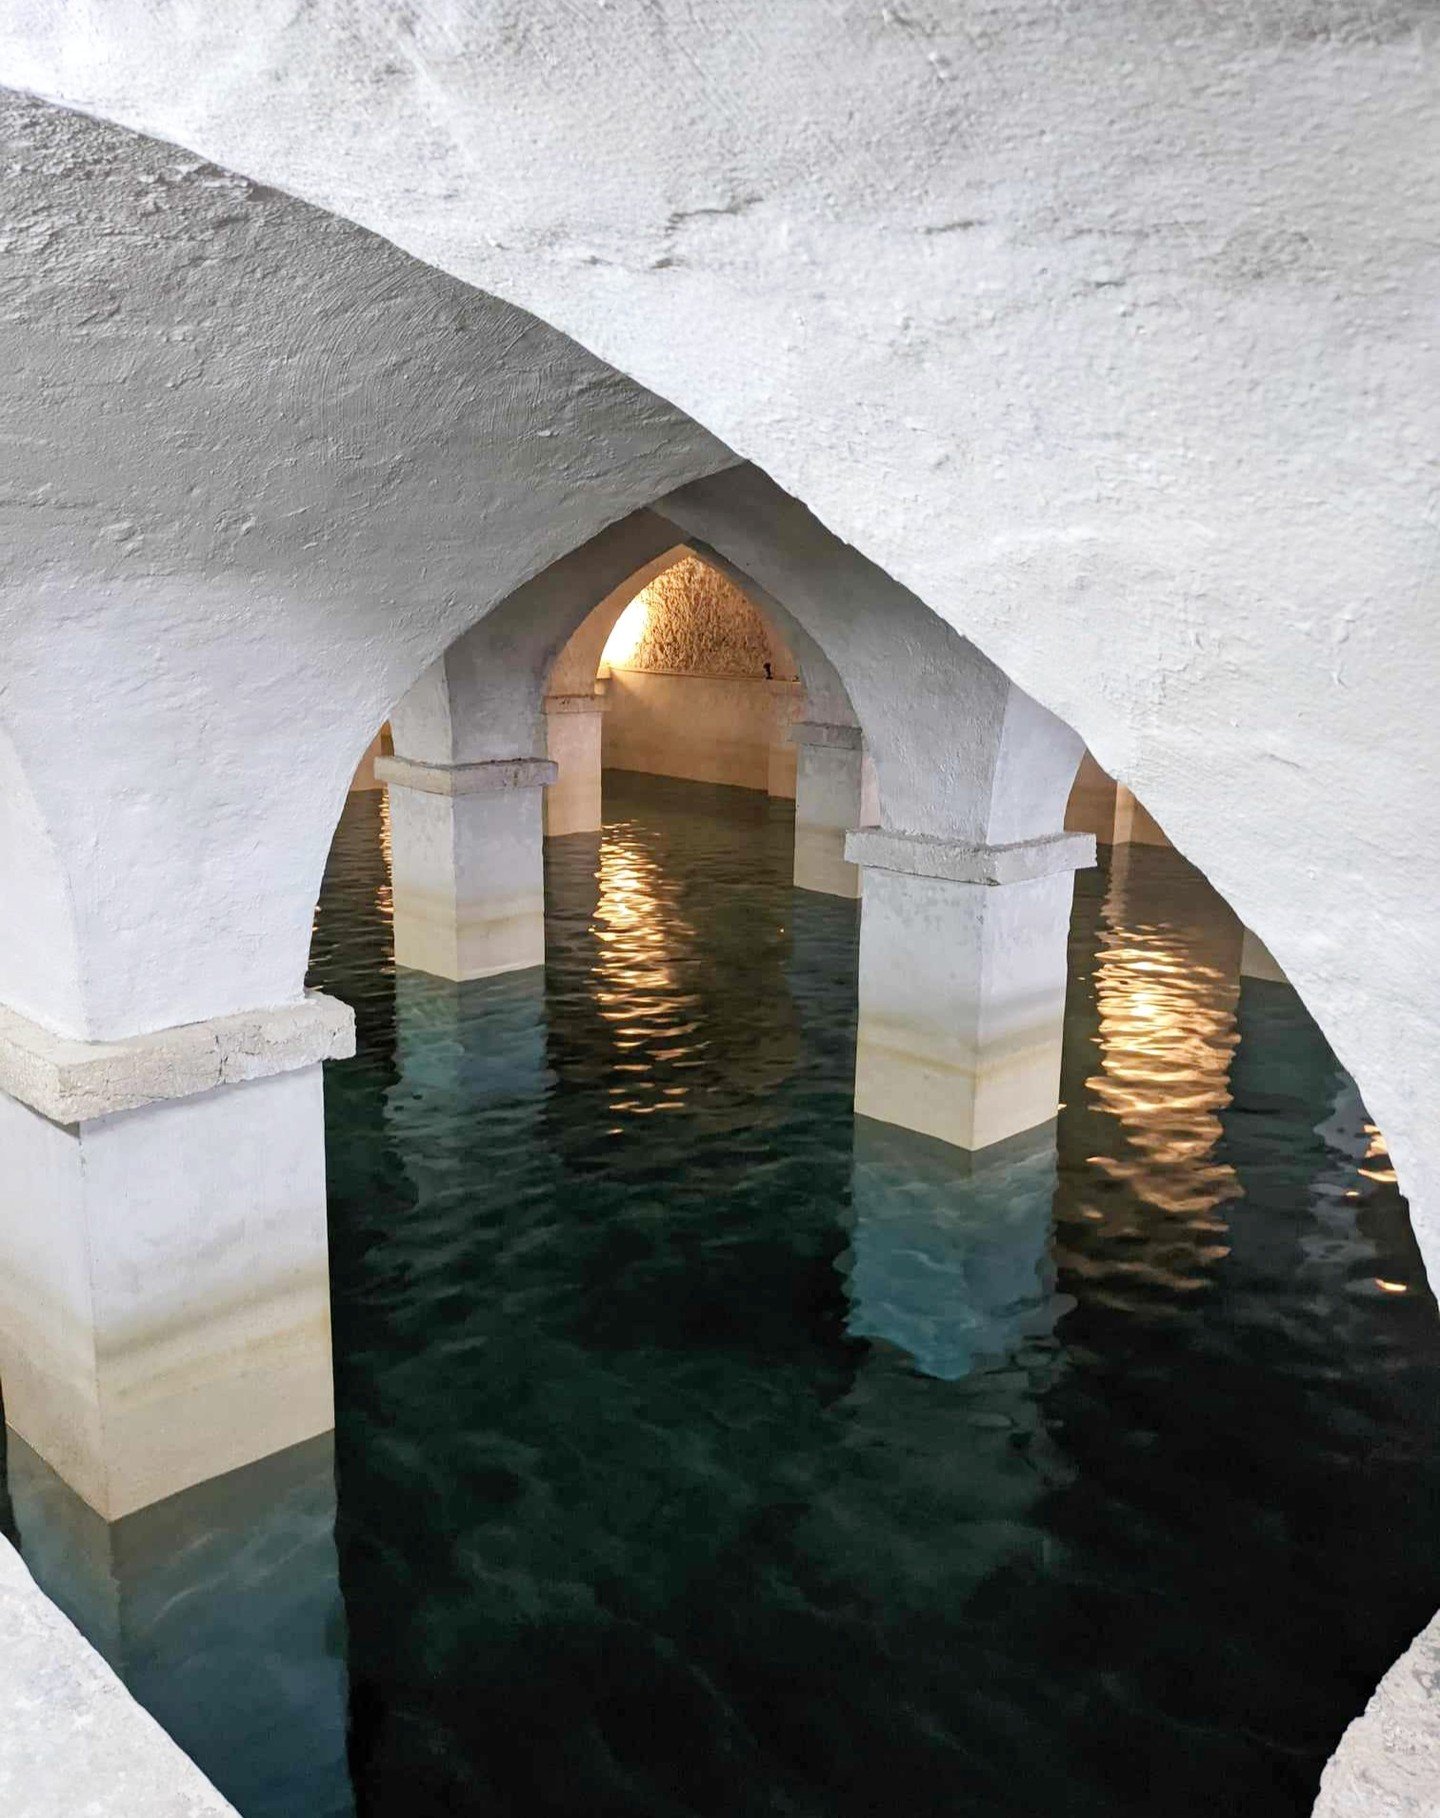 Being invited to join our Airbnb host at work turned out to be quite spectacular especially for someone enamoured with ancient architecture.

A private tour of the Venetian waterworks of Chania . Fed by an under mountain water table with such purity 